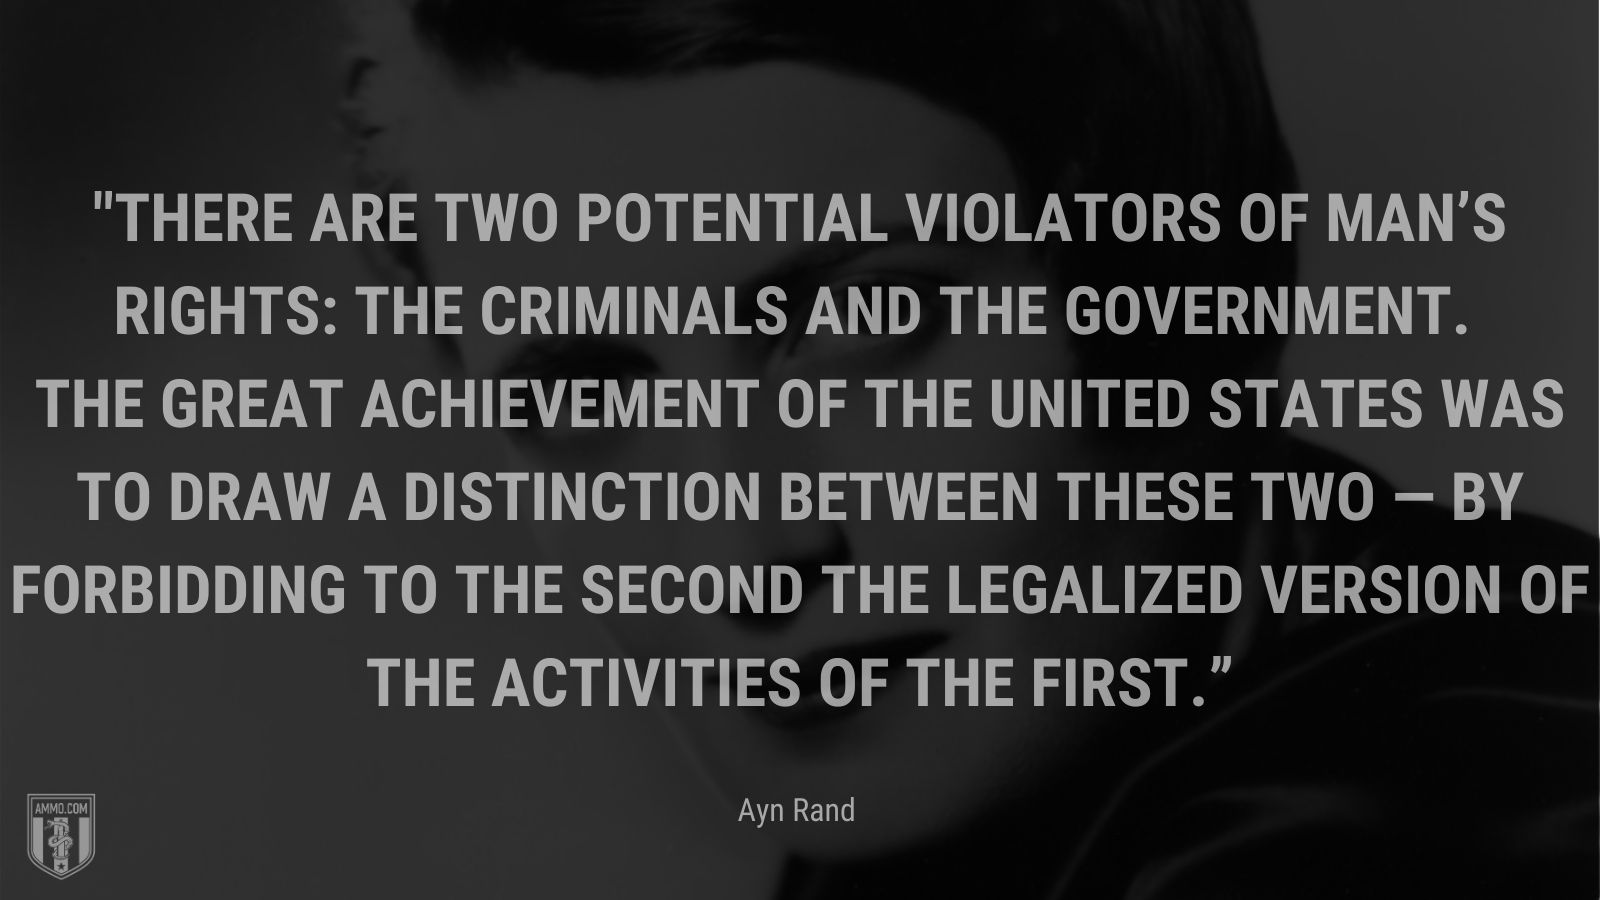 “There are two potential violators of man’s rights: the criminals and the government. The great achievement of the United States was to draw a distinction between these two — by forbidding to the second the legalized version of the activities of the first.” - Ayn Rand